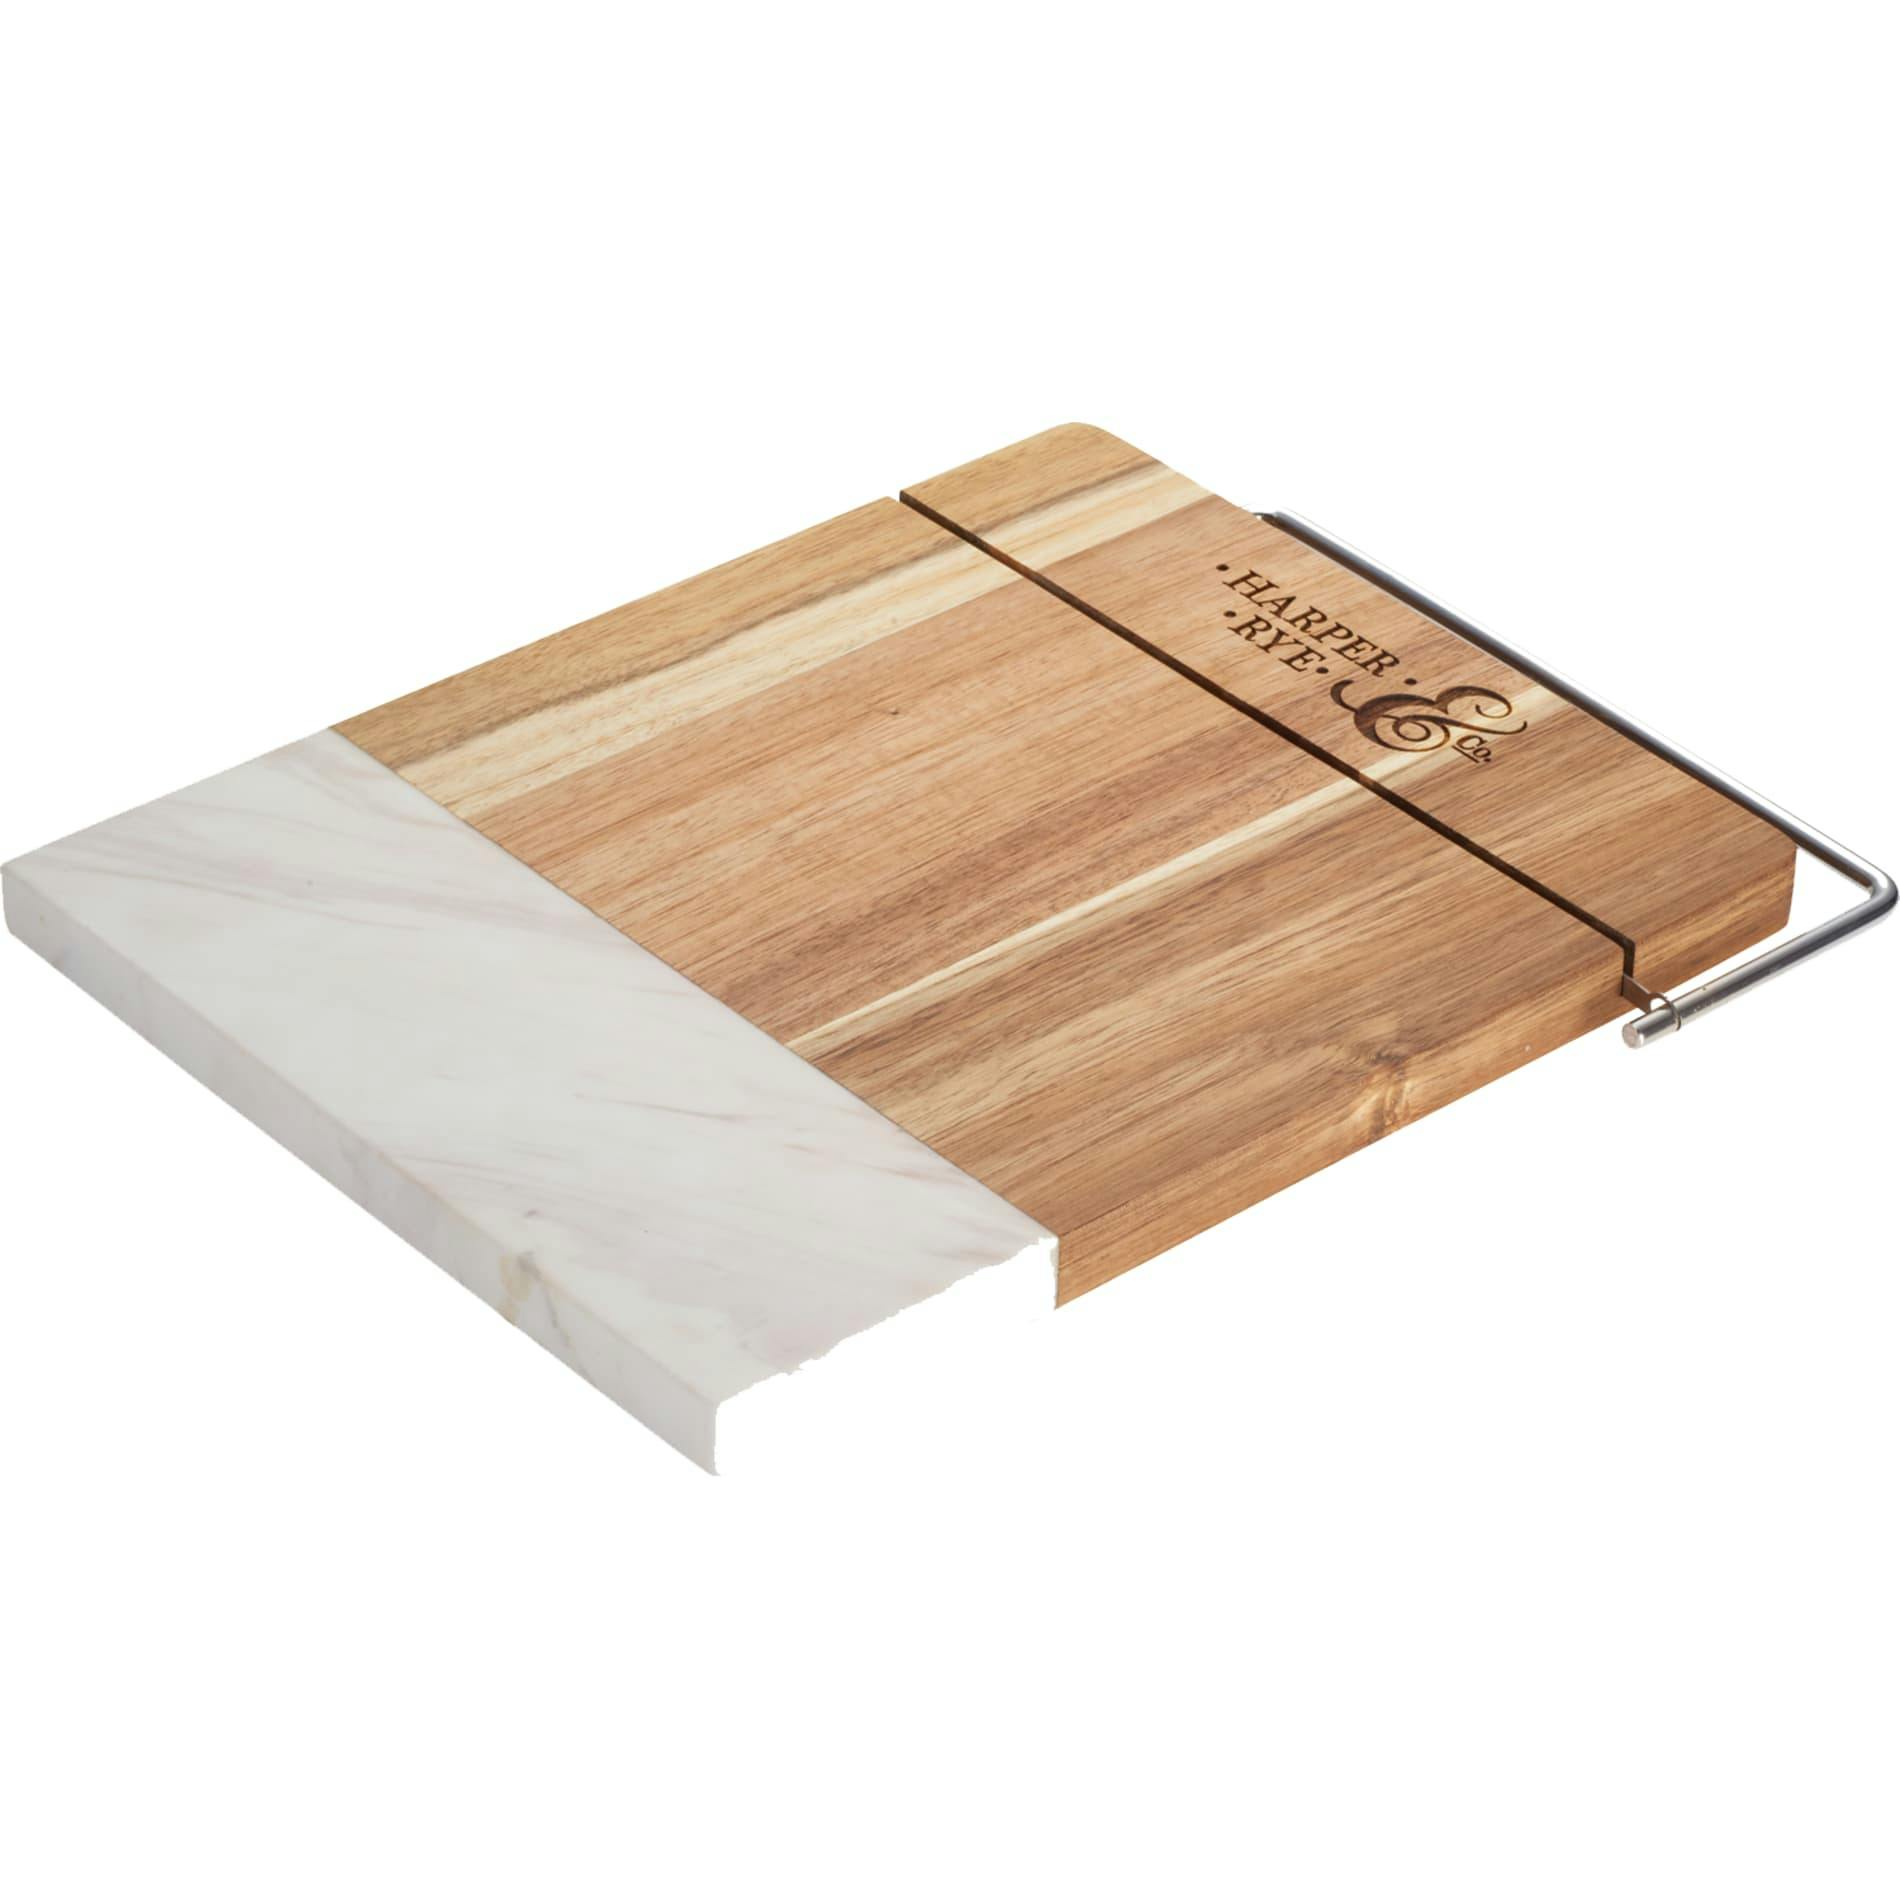 Marble and Acacia Wood Cheese Cutting Board - additional Image 1